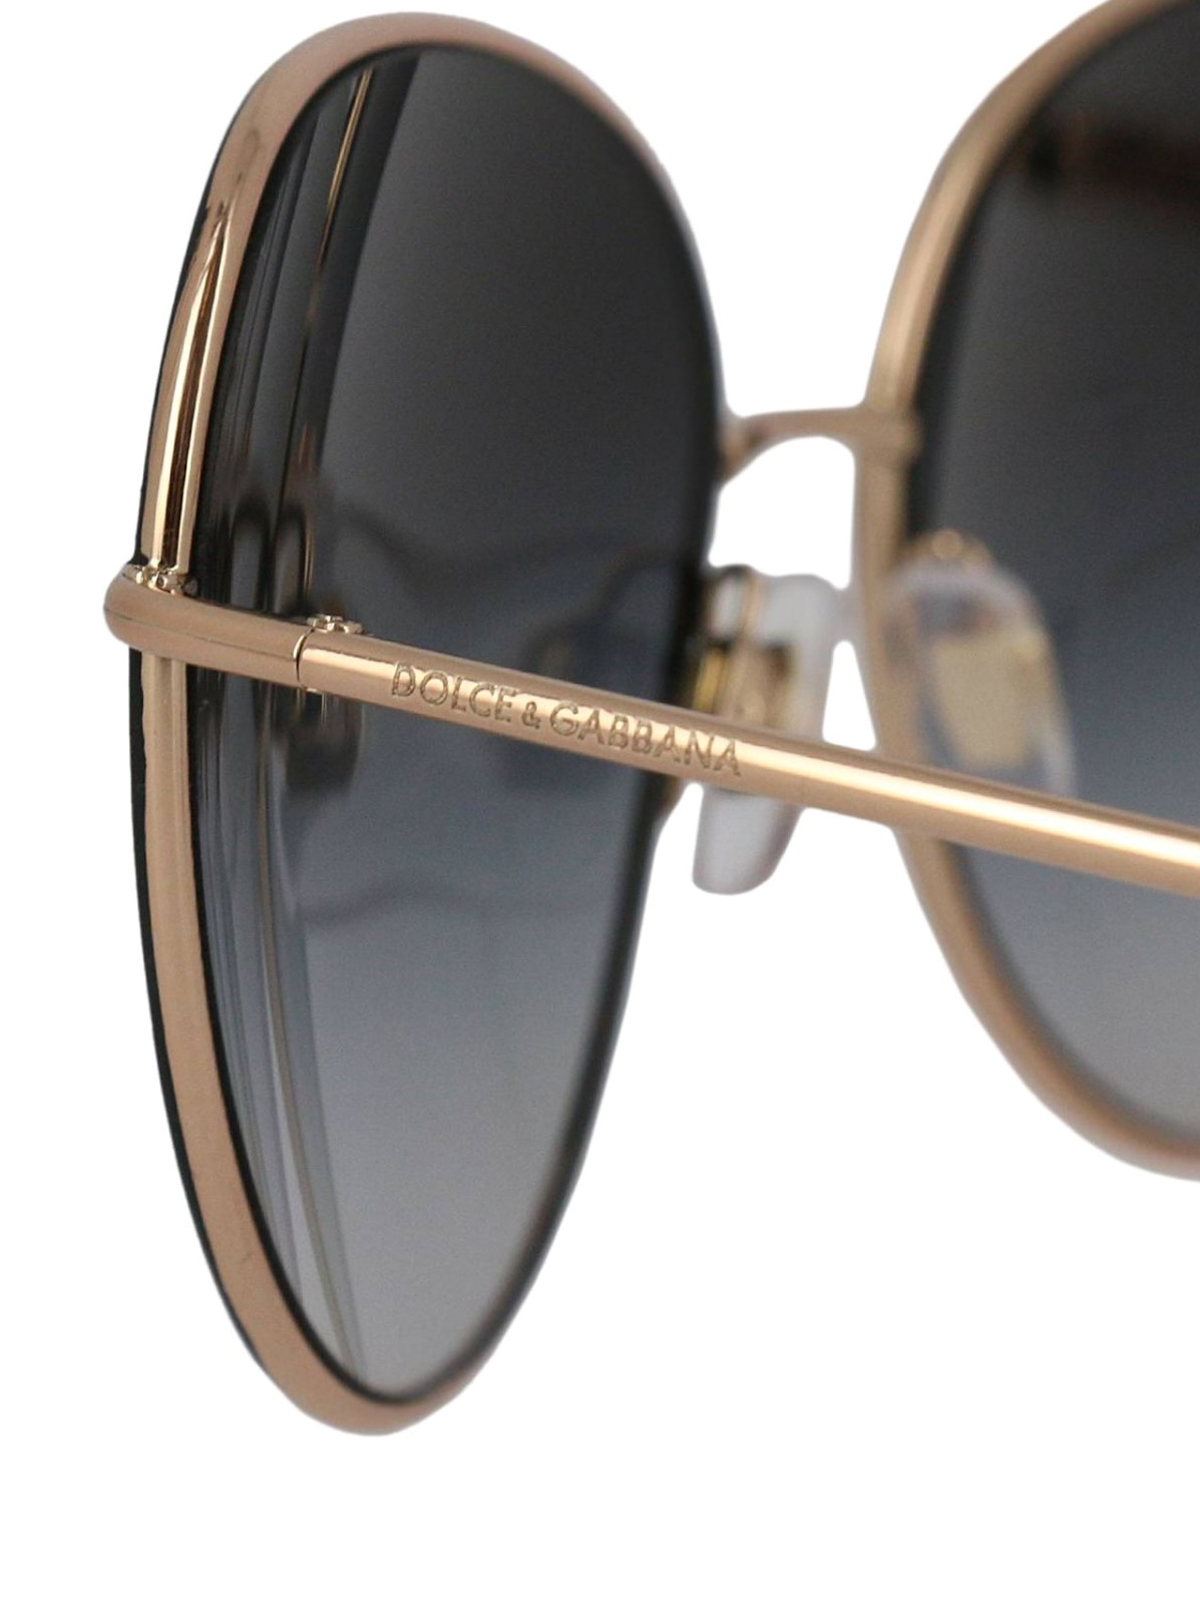 dolce and gabbana sunglasses black and gold